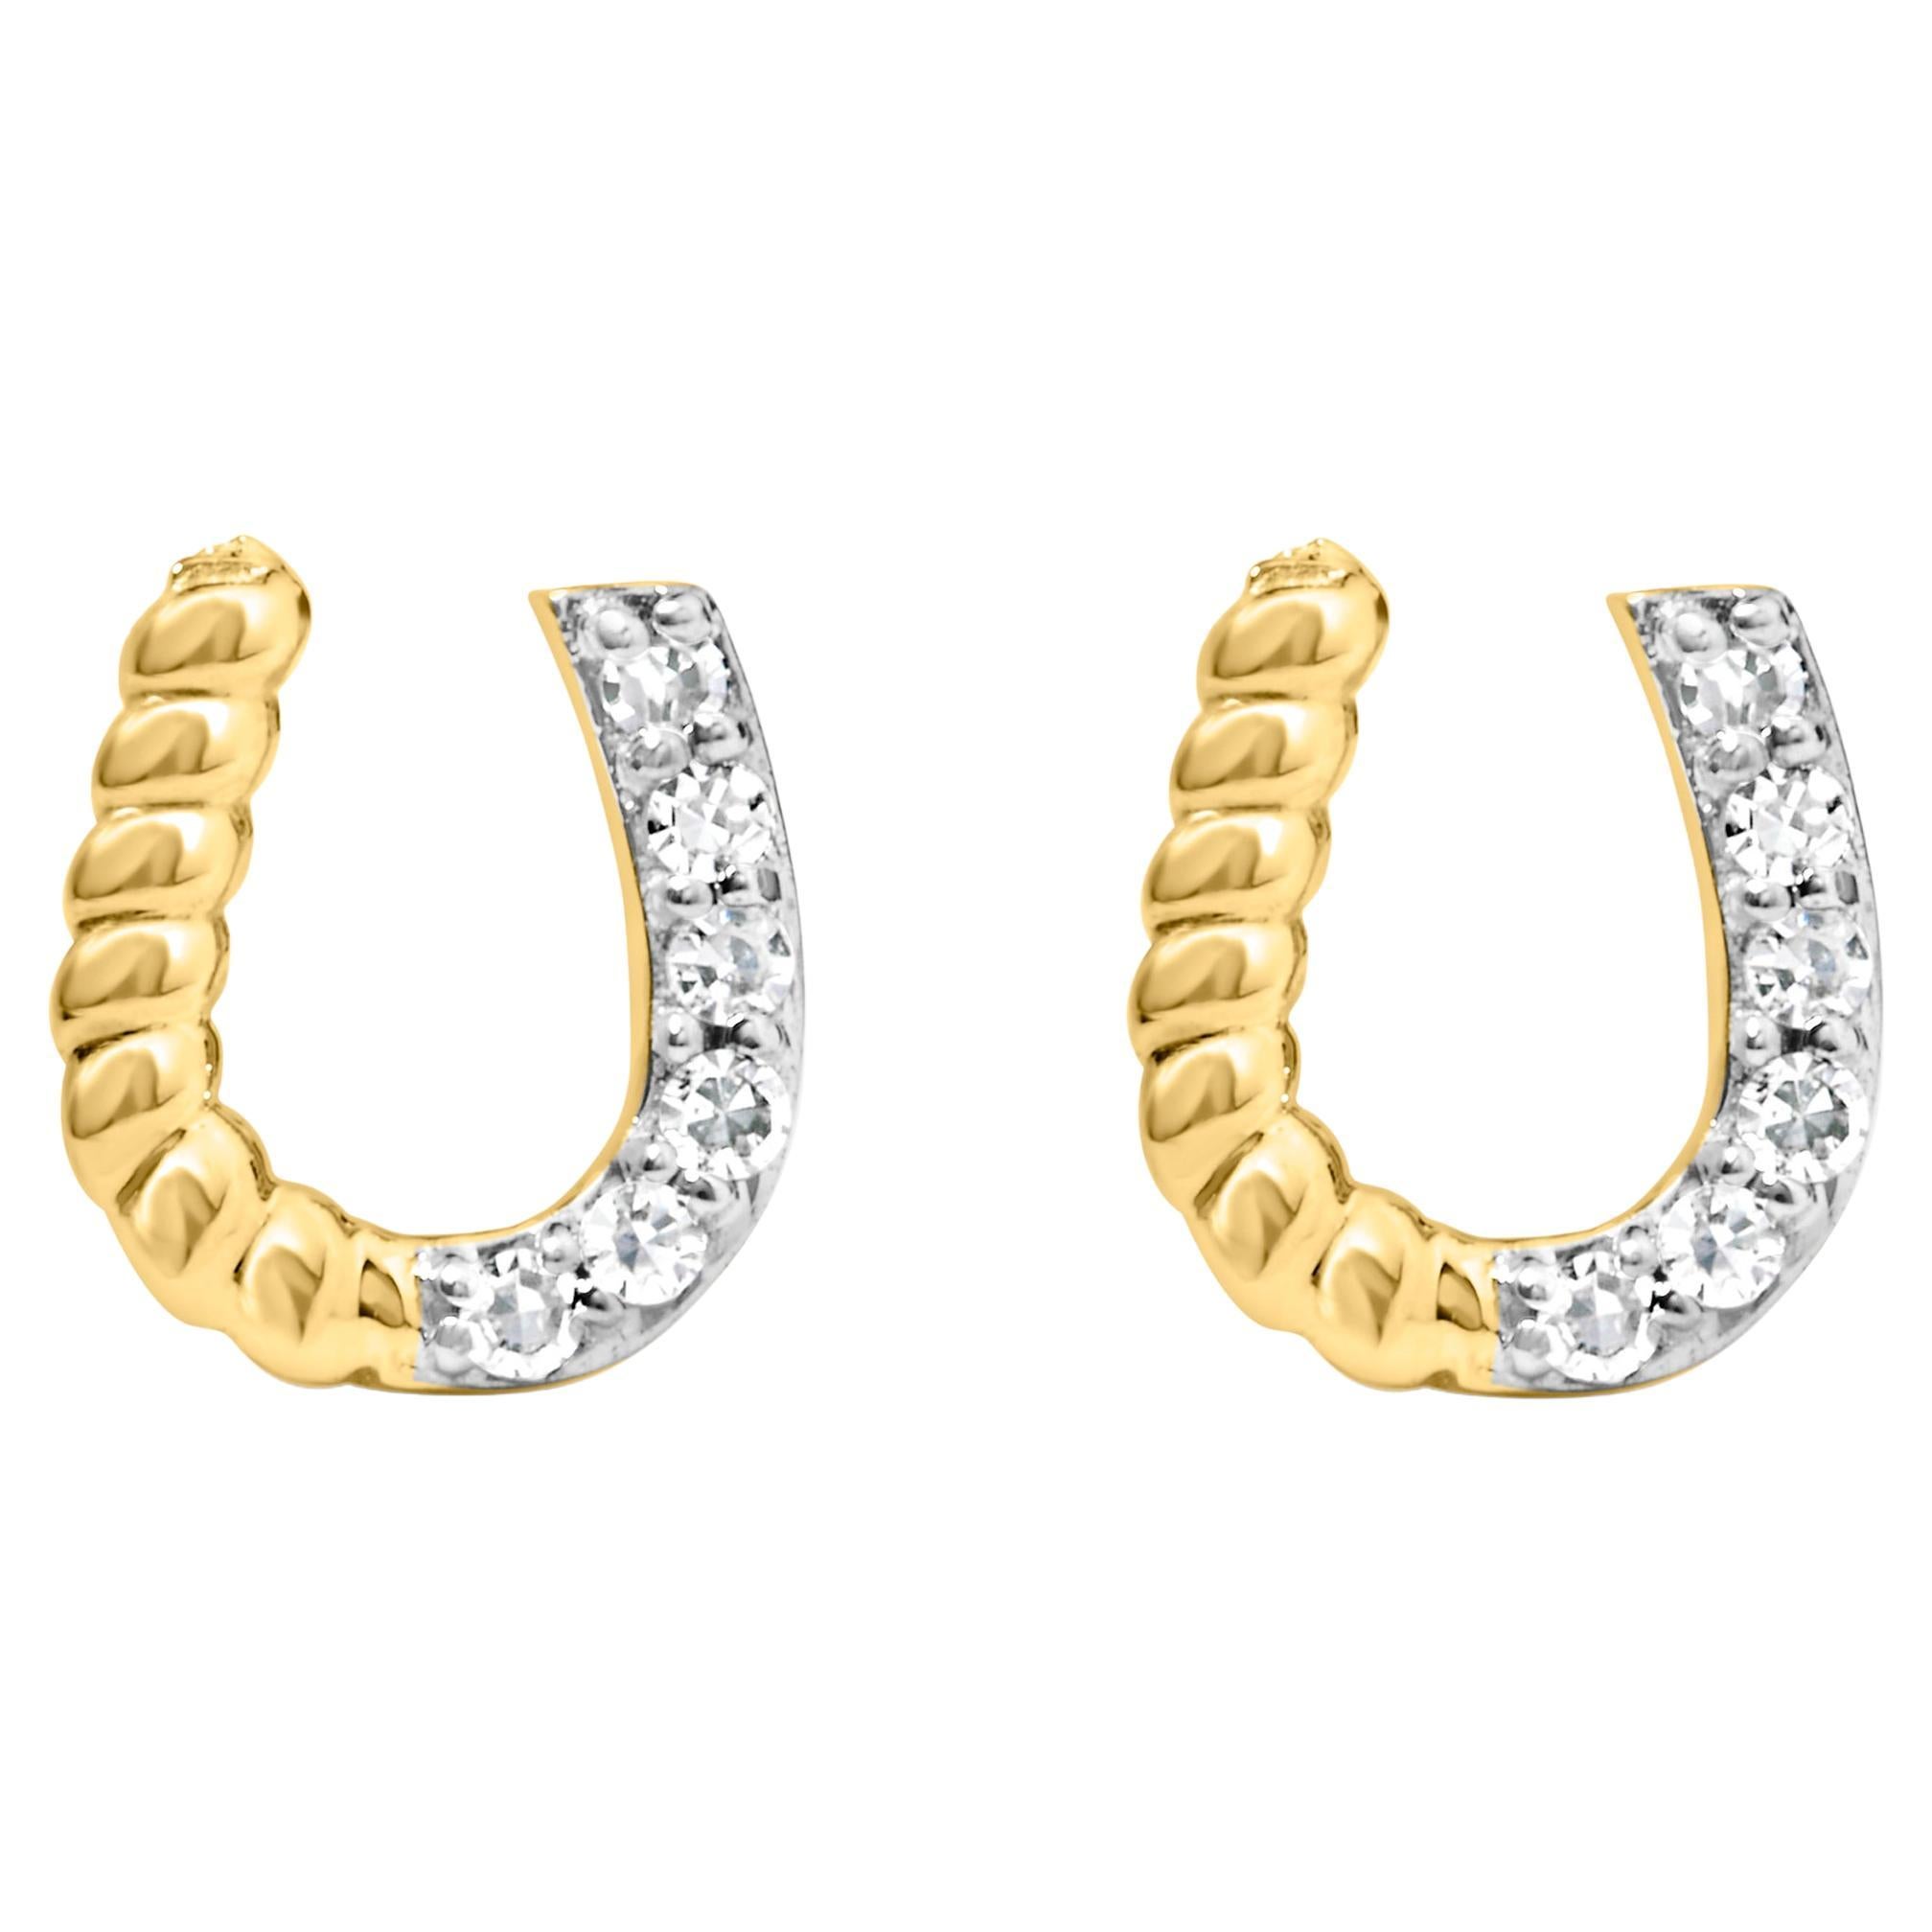 14K Yellow Gold 1/10 Carat Diamond and Braided Horseshoe Stud Earrings For Sale